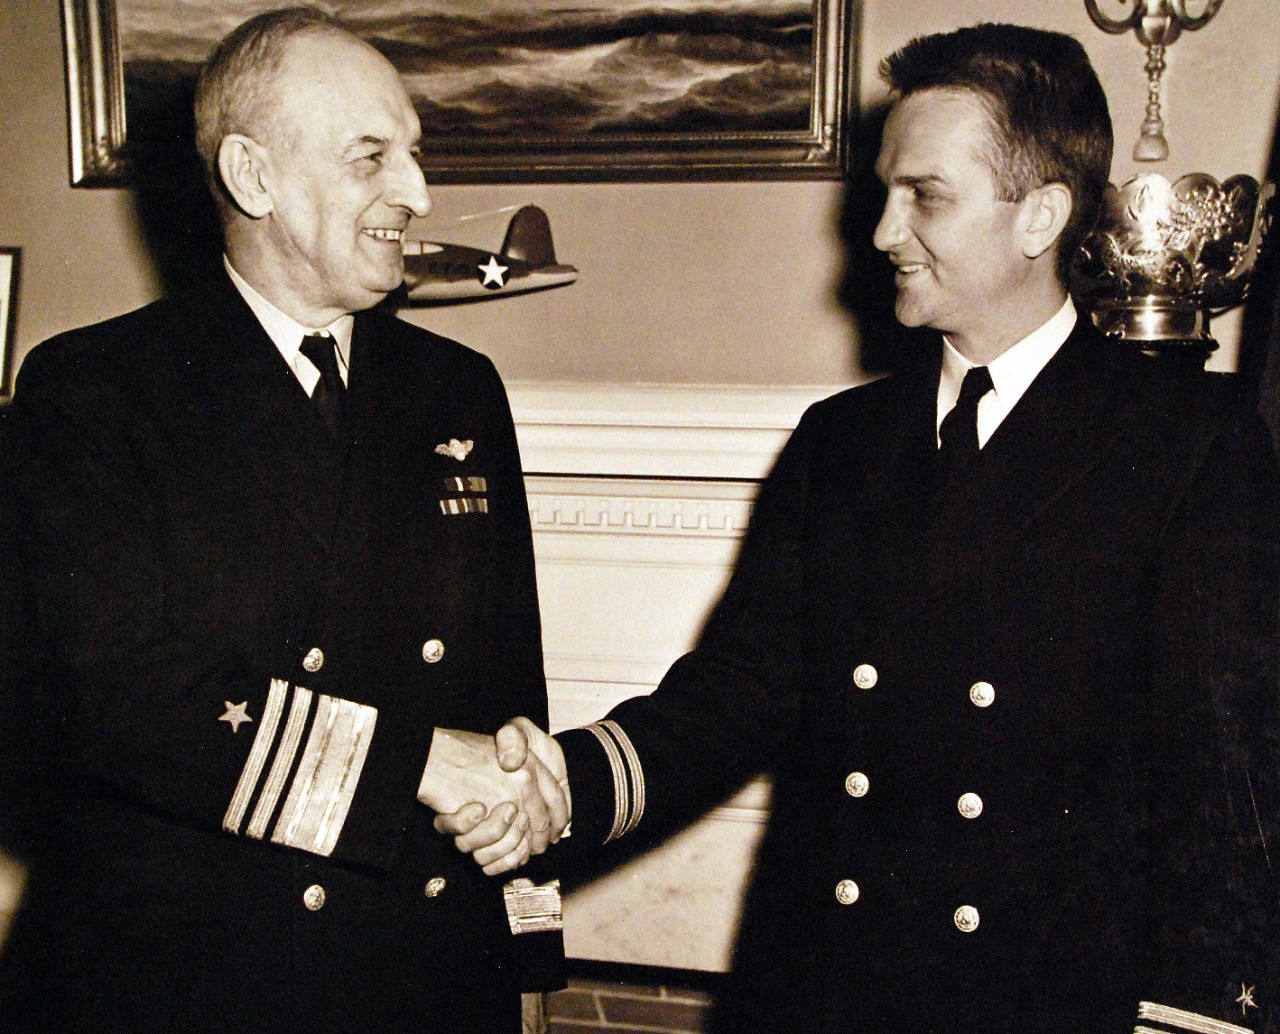 <p>80-G-43658: Sinking of German U-boat, U-405. Vice Admiral Frederick J. Borne congratulates Lieutenant Commander Charles H. Hutchins, USNR, on his promotion to the rank of Lieutenant Commander, November 11, 1943.&nbsp;</p>
